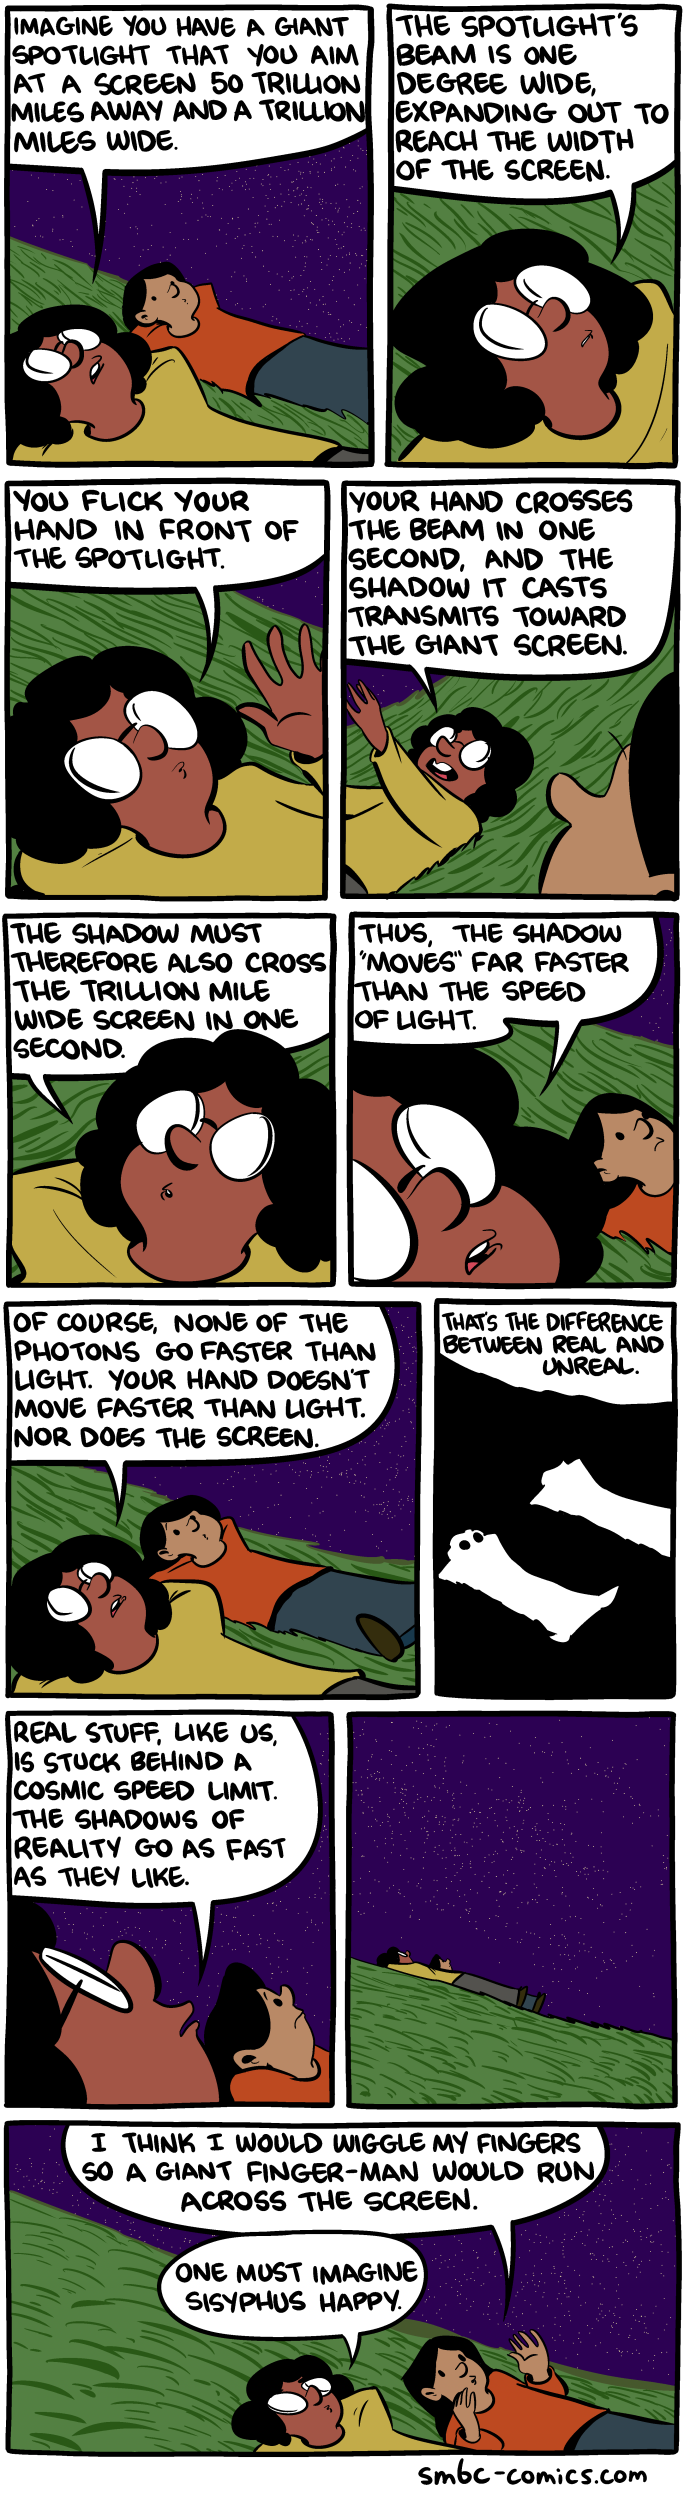 SMBC: Now 98% little girls talking about physics.